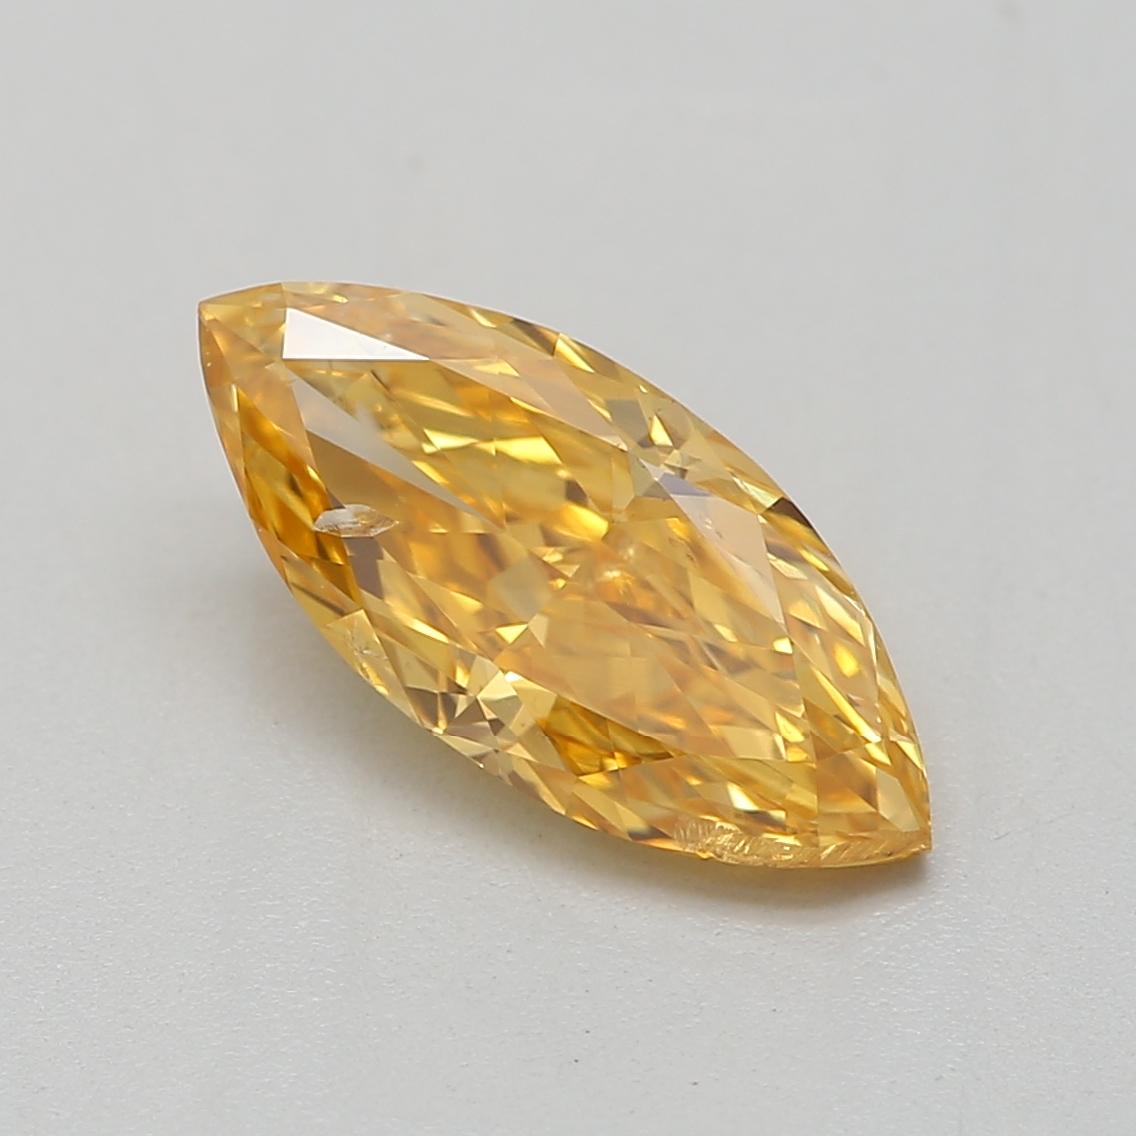 *100% NATURAL FANCY COLOUR DIAMOND*

✪ Diamond Details ✪

➛ Shape: marquise
➛ Colour Grade: Fancy Vivid Orange Yellow
➛ Carat: 0.69
➛ Clarity: I1
➛ GIA  Certified 

^FEATURES OF THE DIAMOND^

✪ Our Specialty ✪

➛ We can definitely work on your